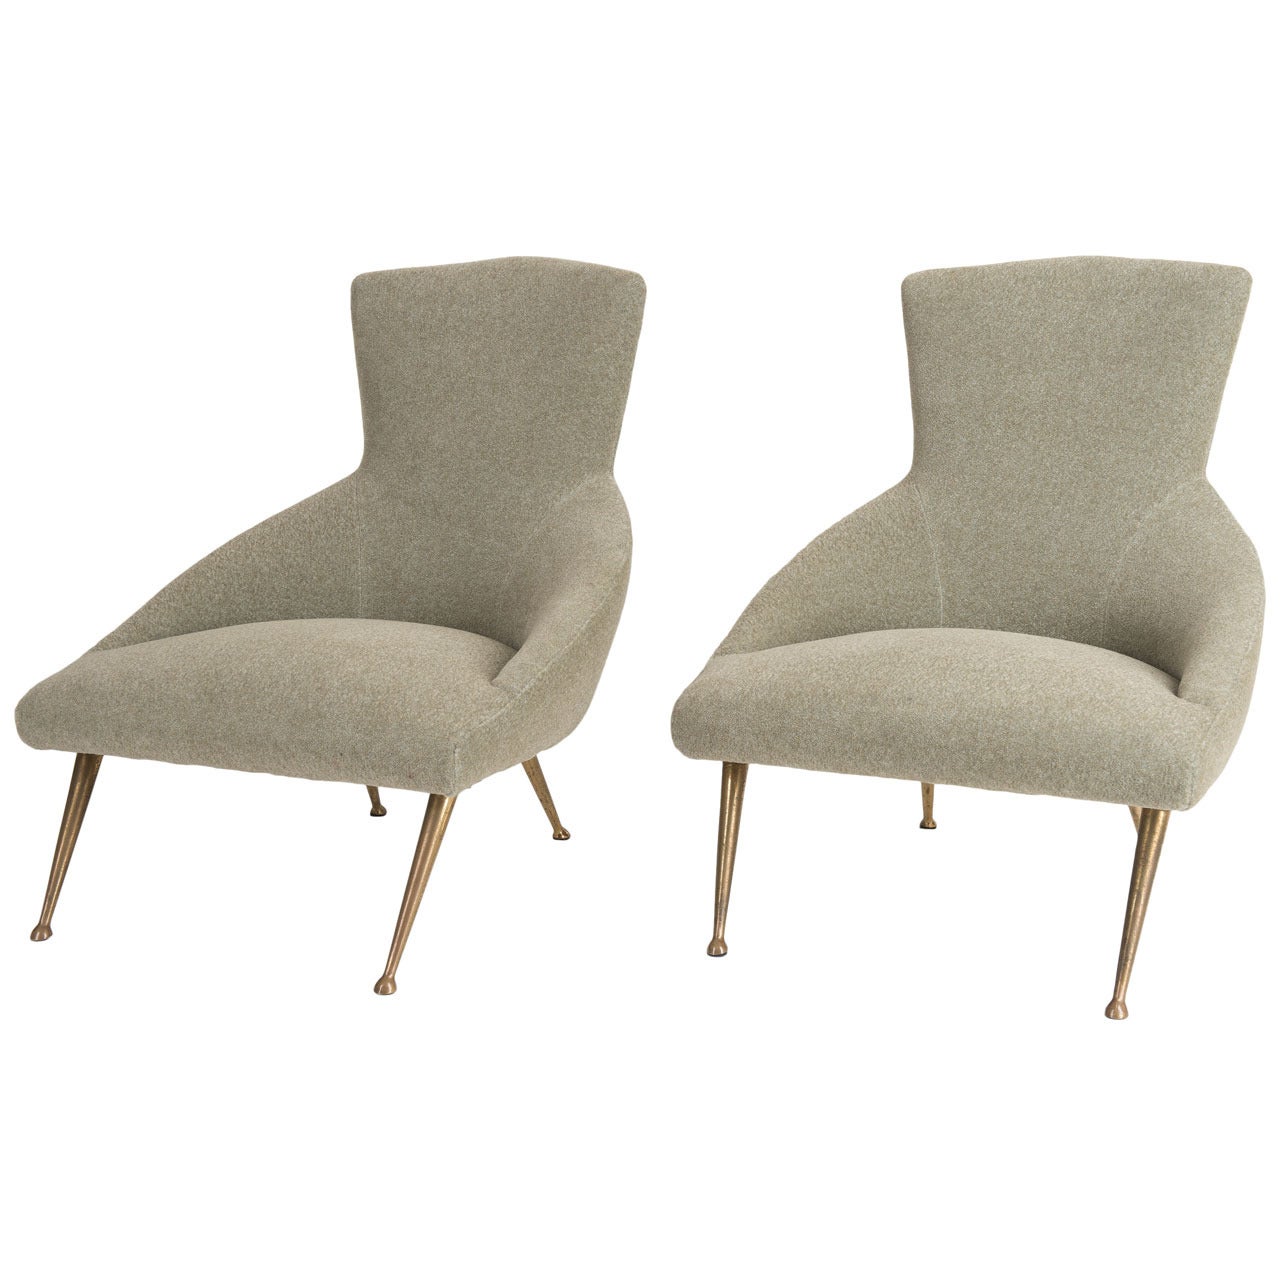 Pair of Fireside Chairs by Ico Parisi